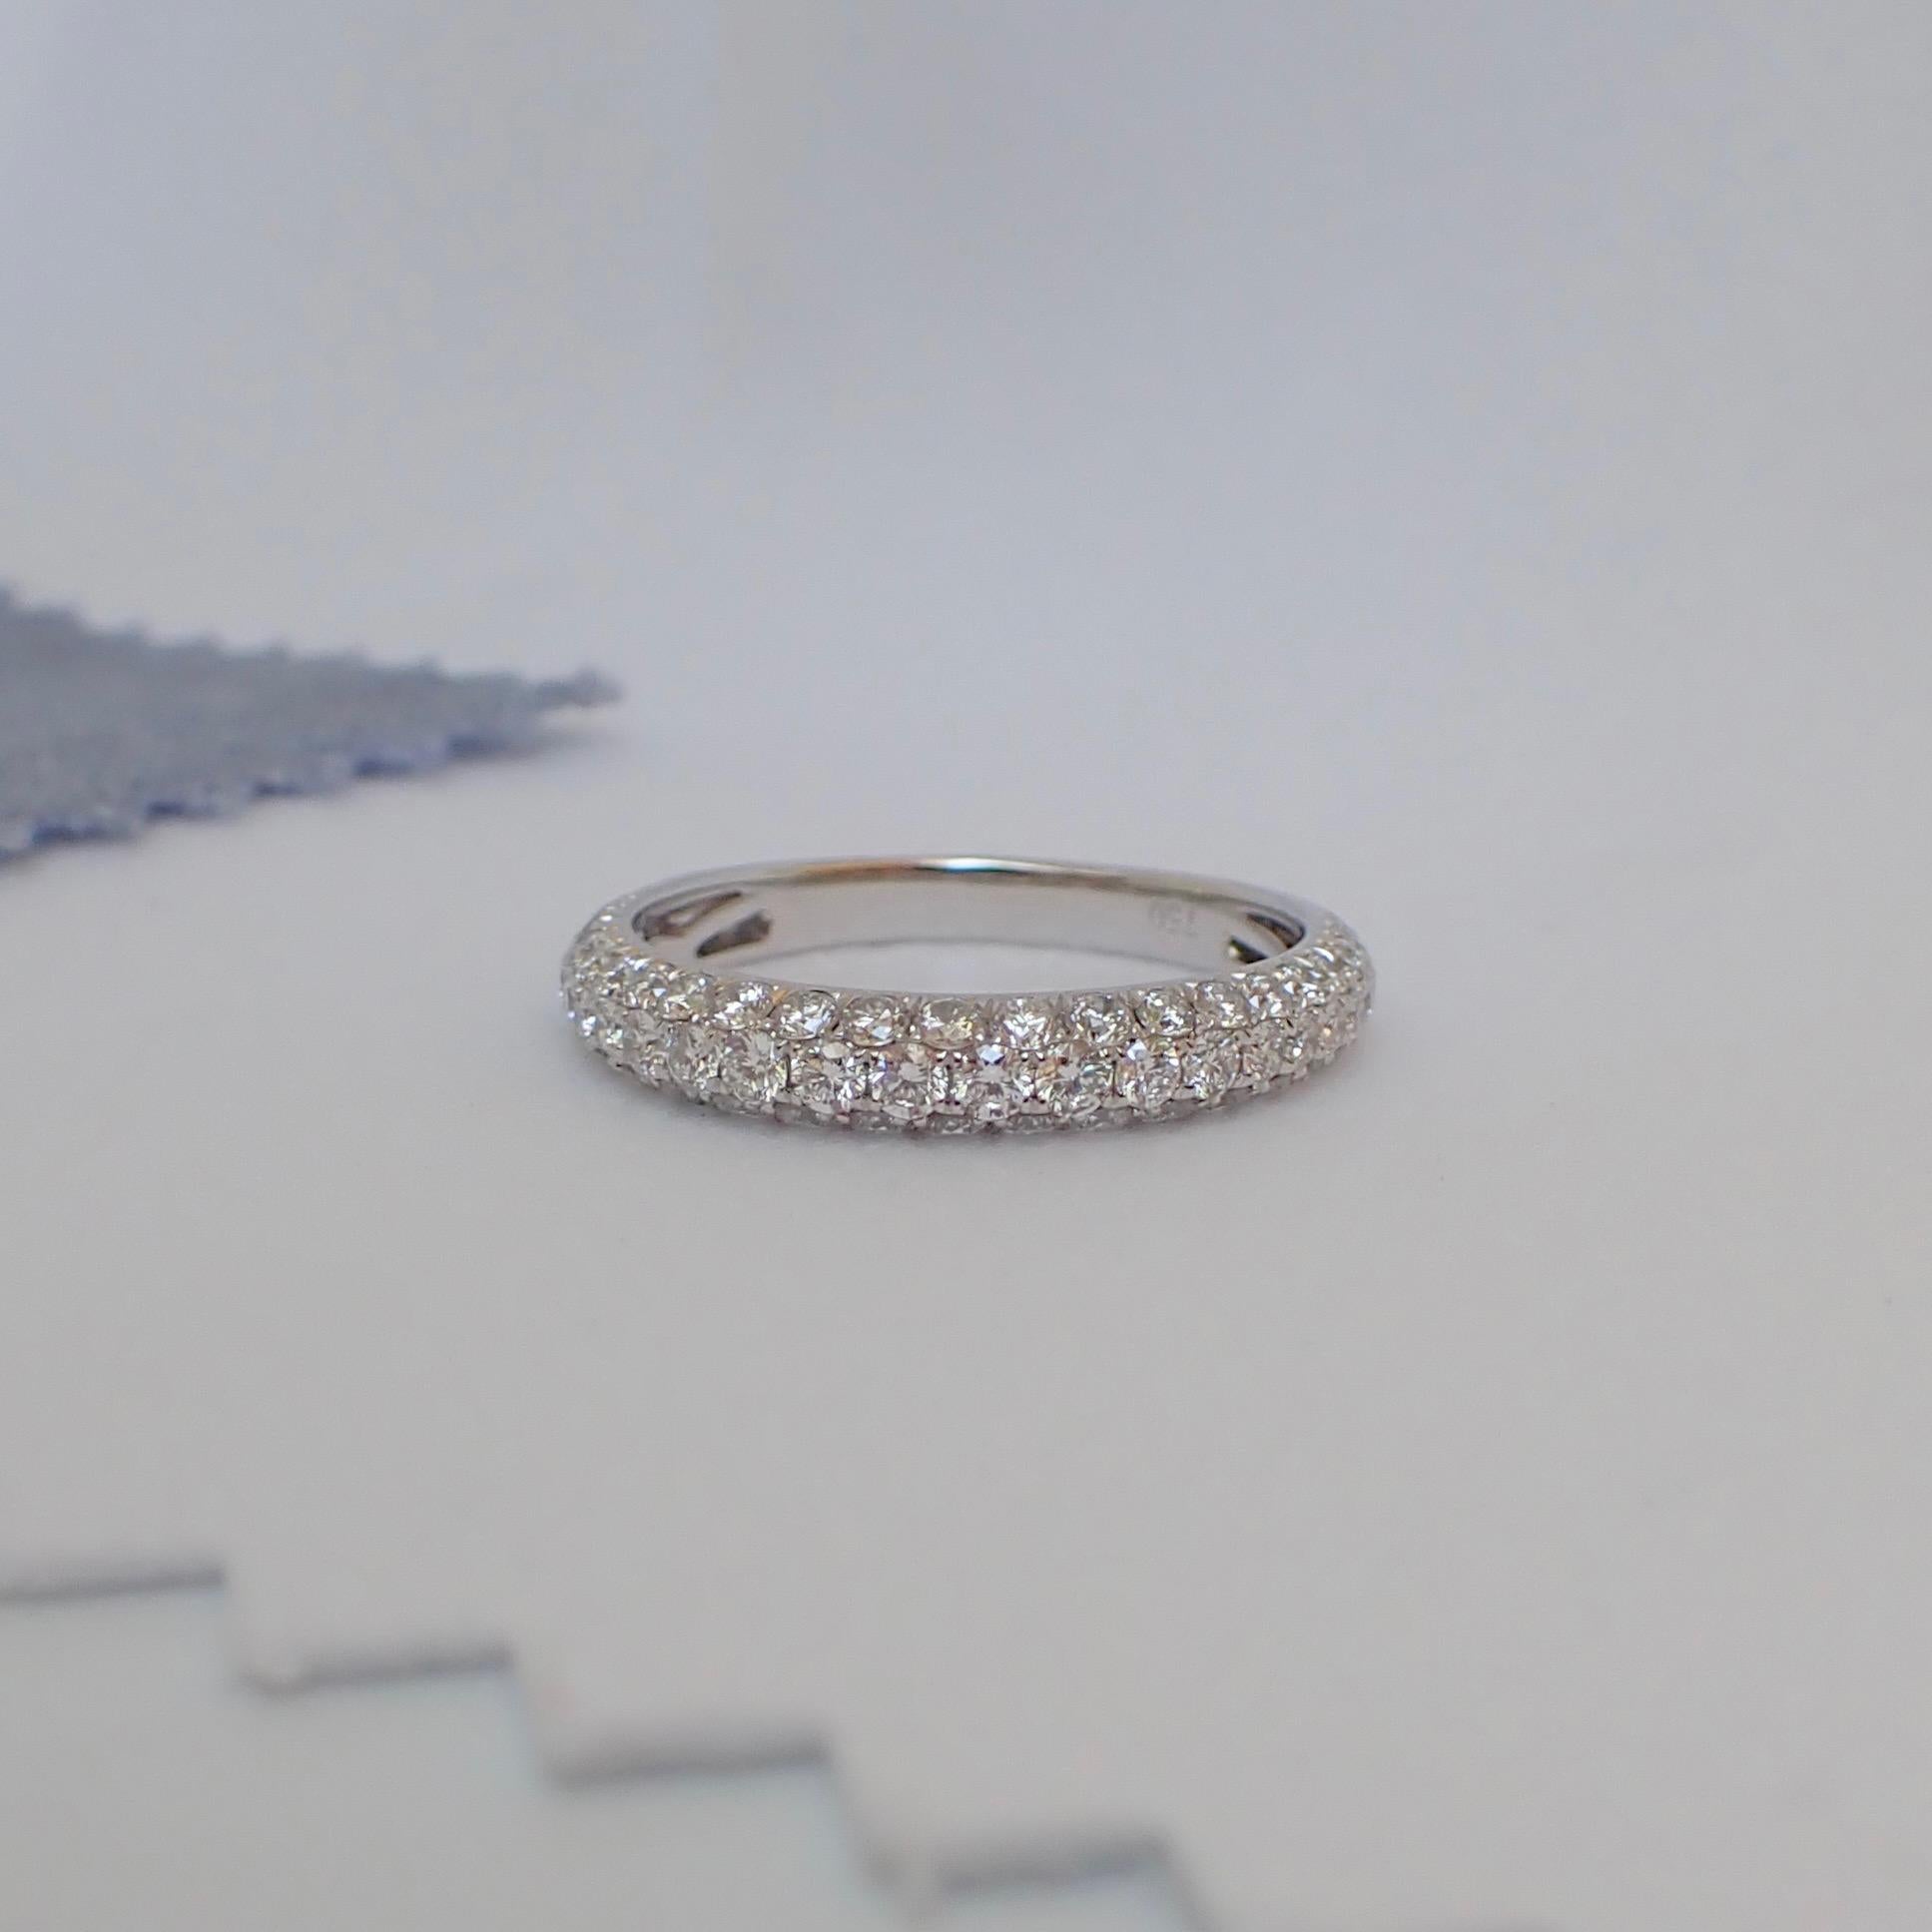 18K White Gold Band Ring with 0.98 carat of Diamond